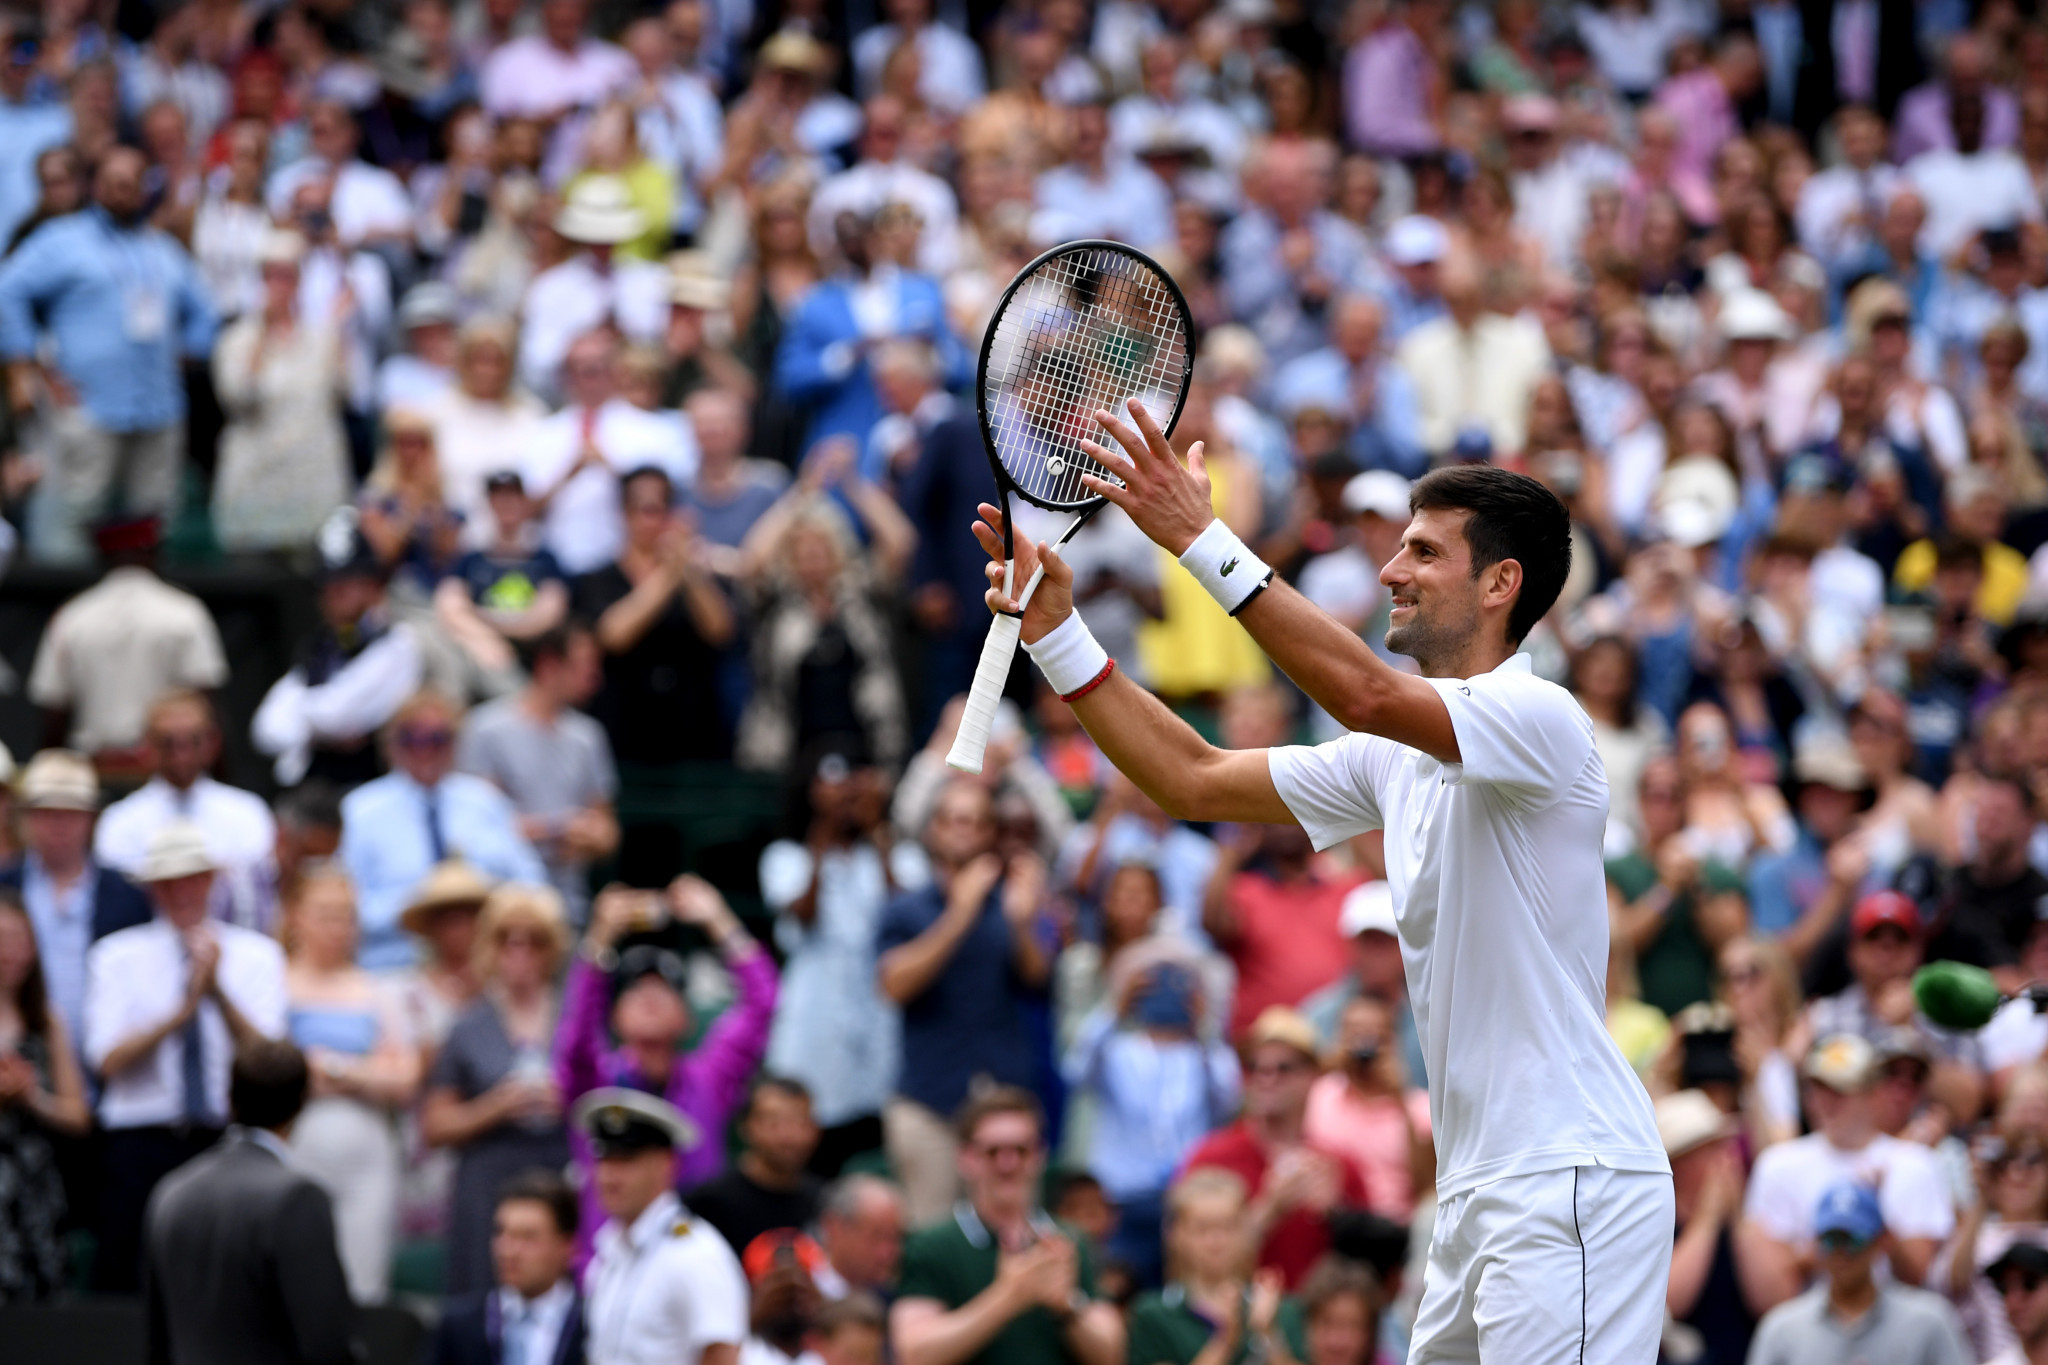 Djokovic through to semi-finals at Wimbledon as Nadal and Federer set up mouthwatering last-four clash